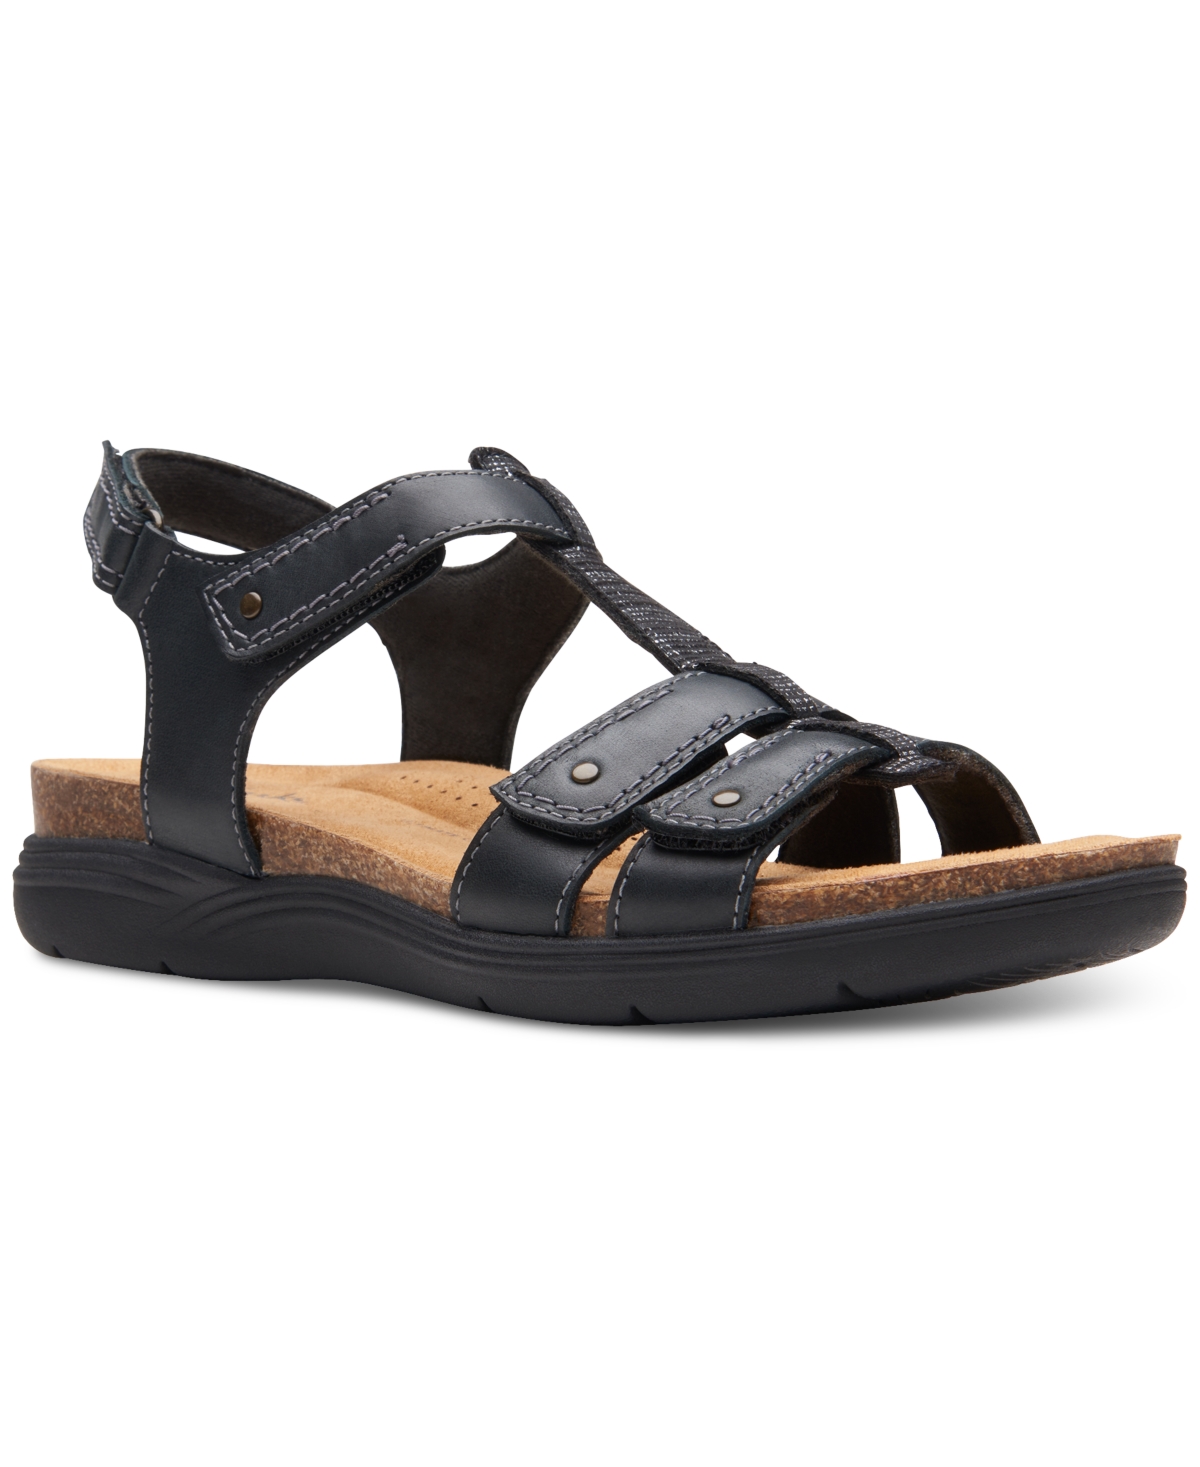 Clarks Women's April Cove Studded Strapped Comfort Sandals In Black Leather